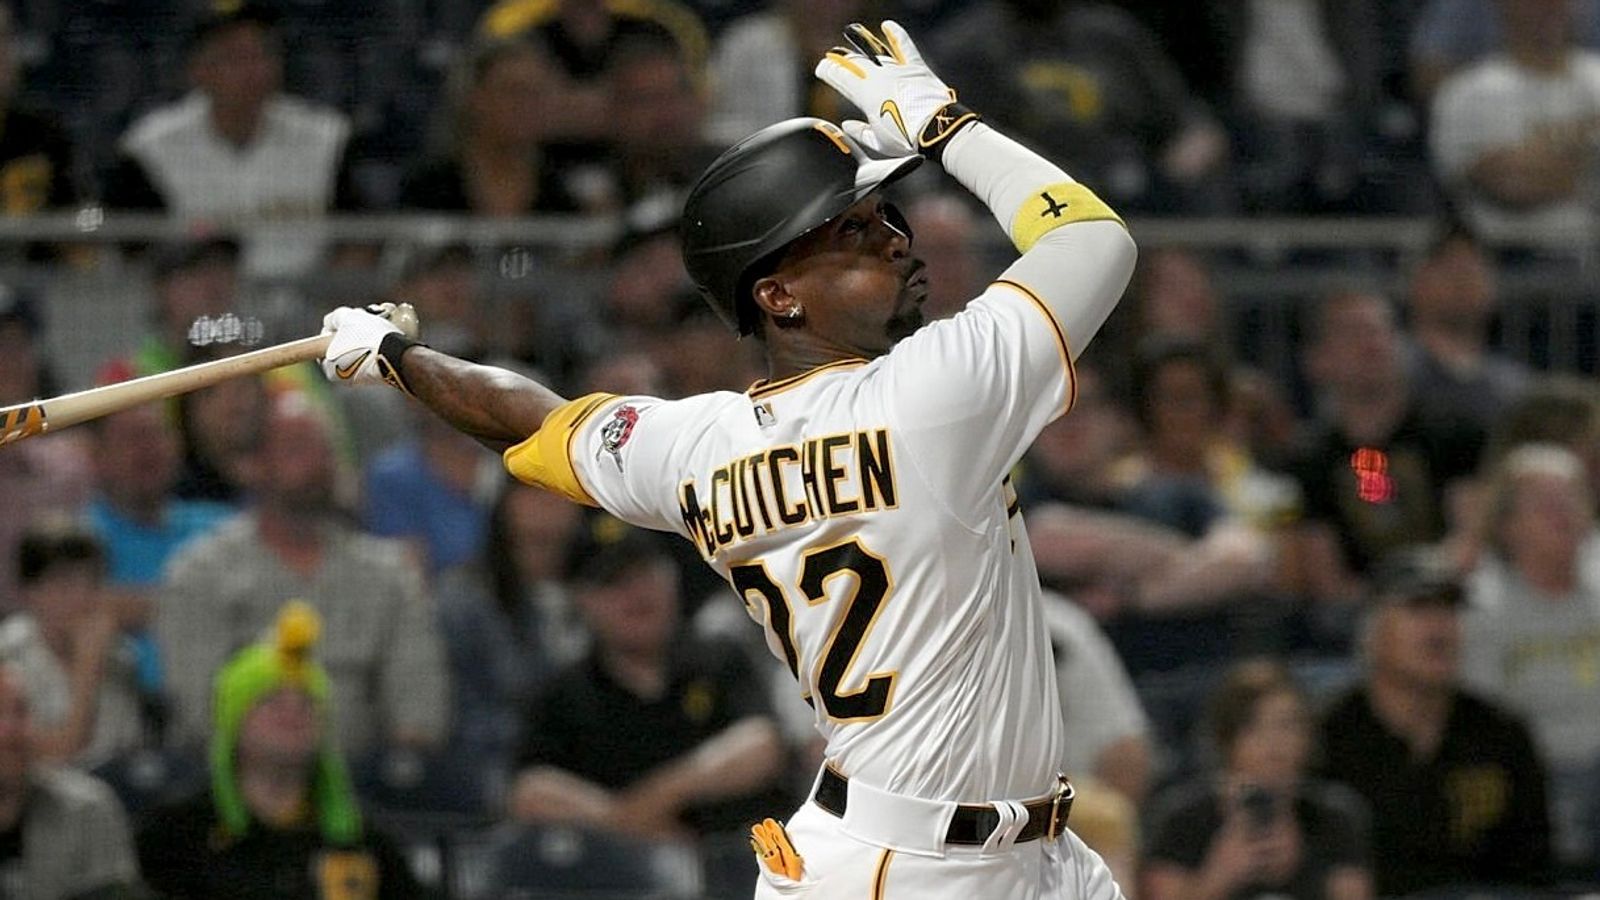 On doorstep of 2,000 hits, a walk shows 'why he's Andrew McCutchen